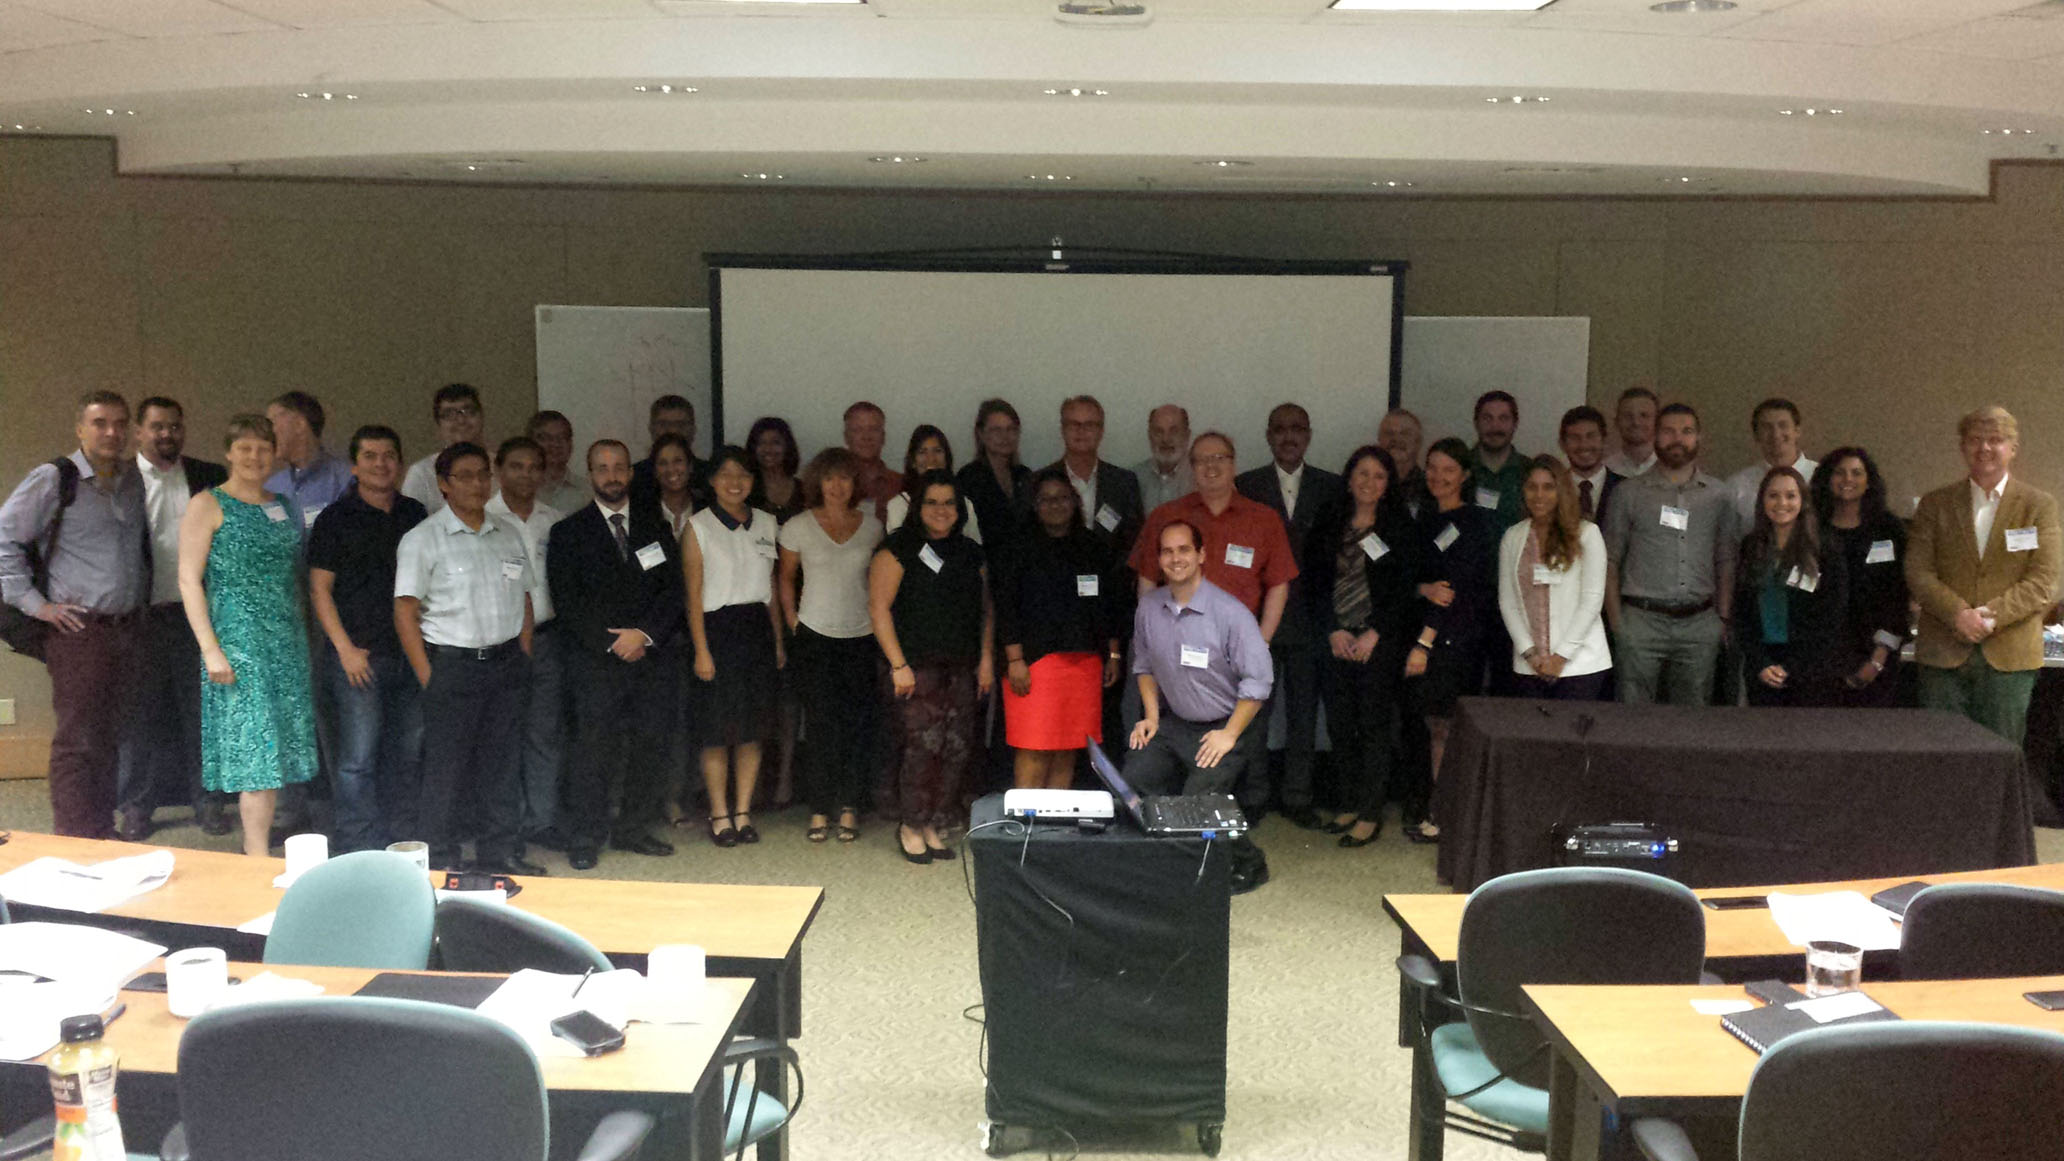 CBTH Students, Staff, and Sponsors at the 2015 CBTH Annual Meeting